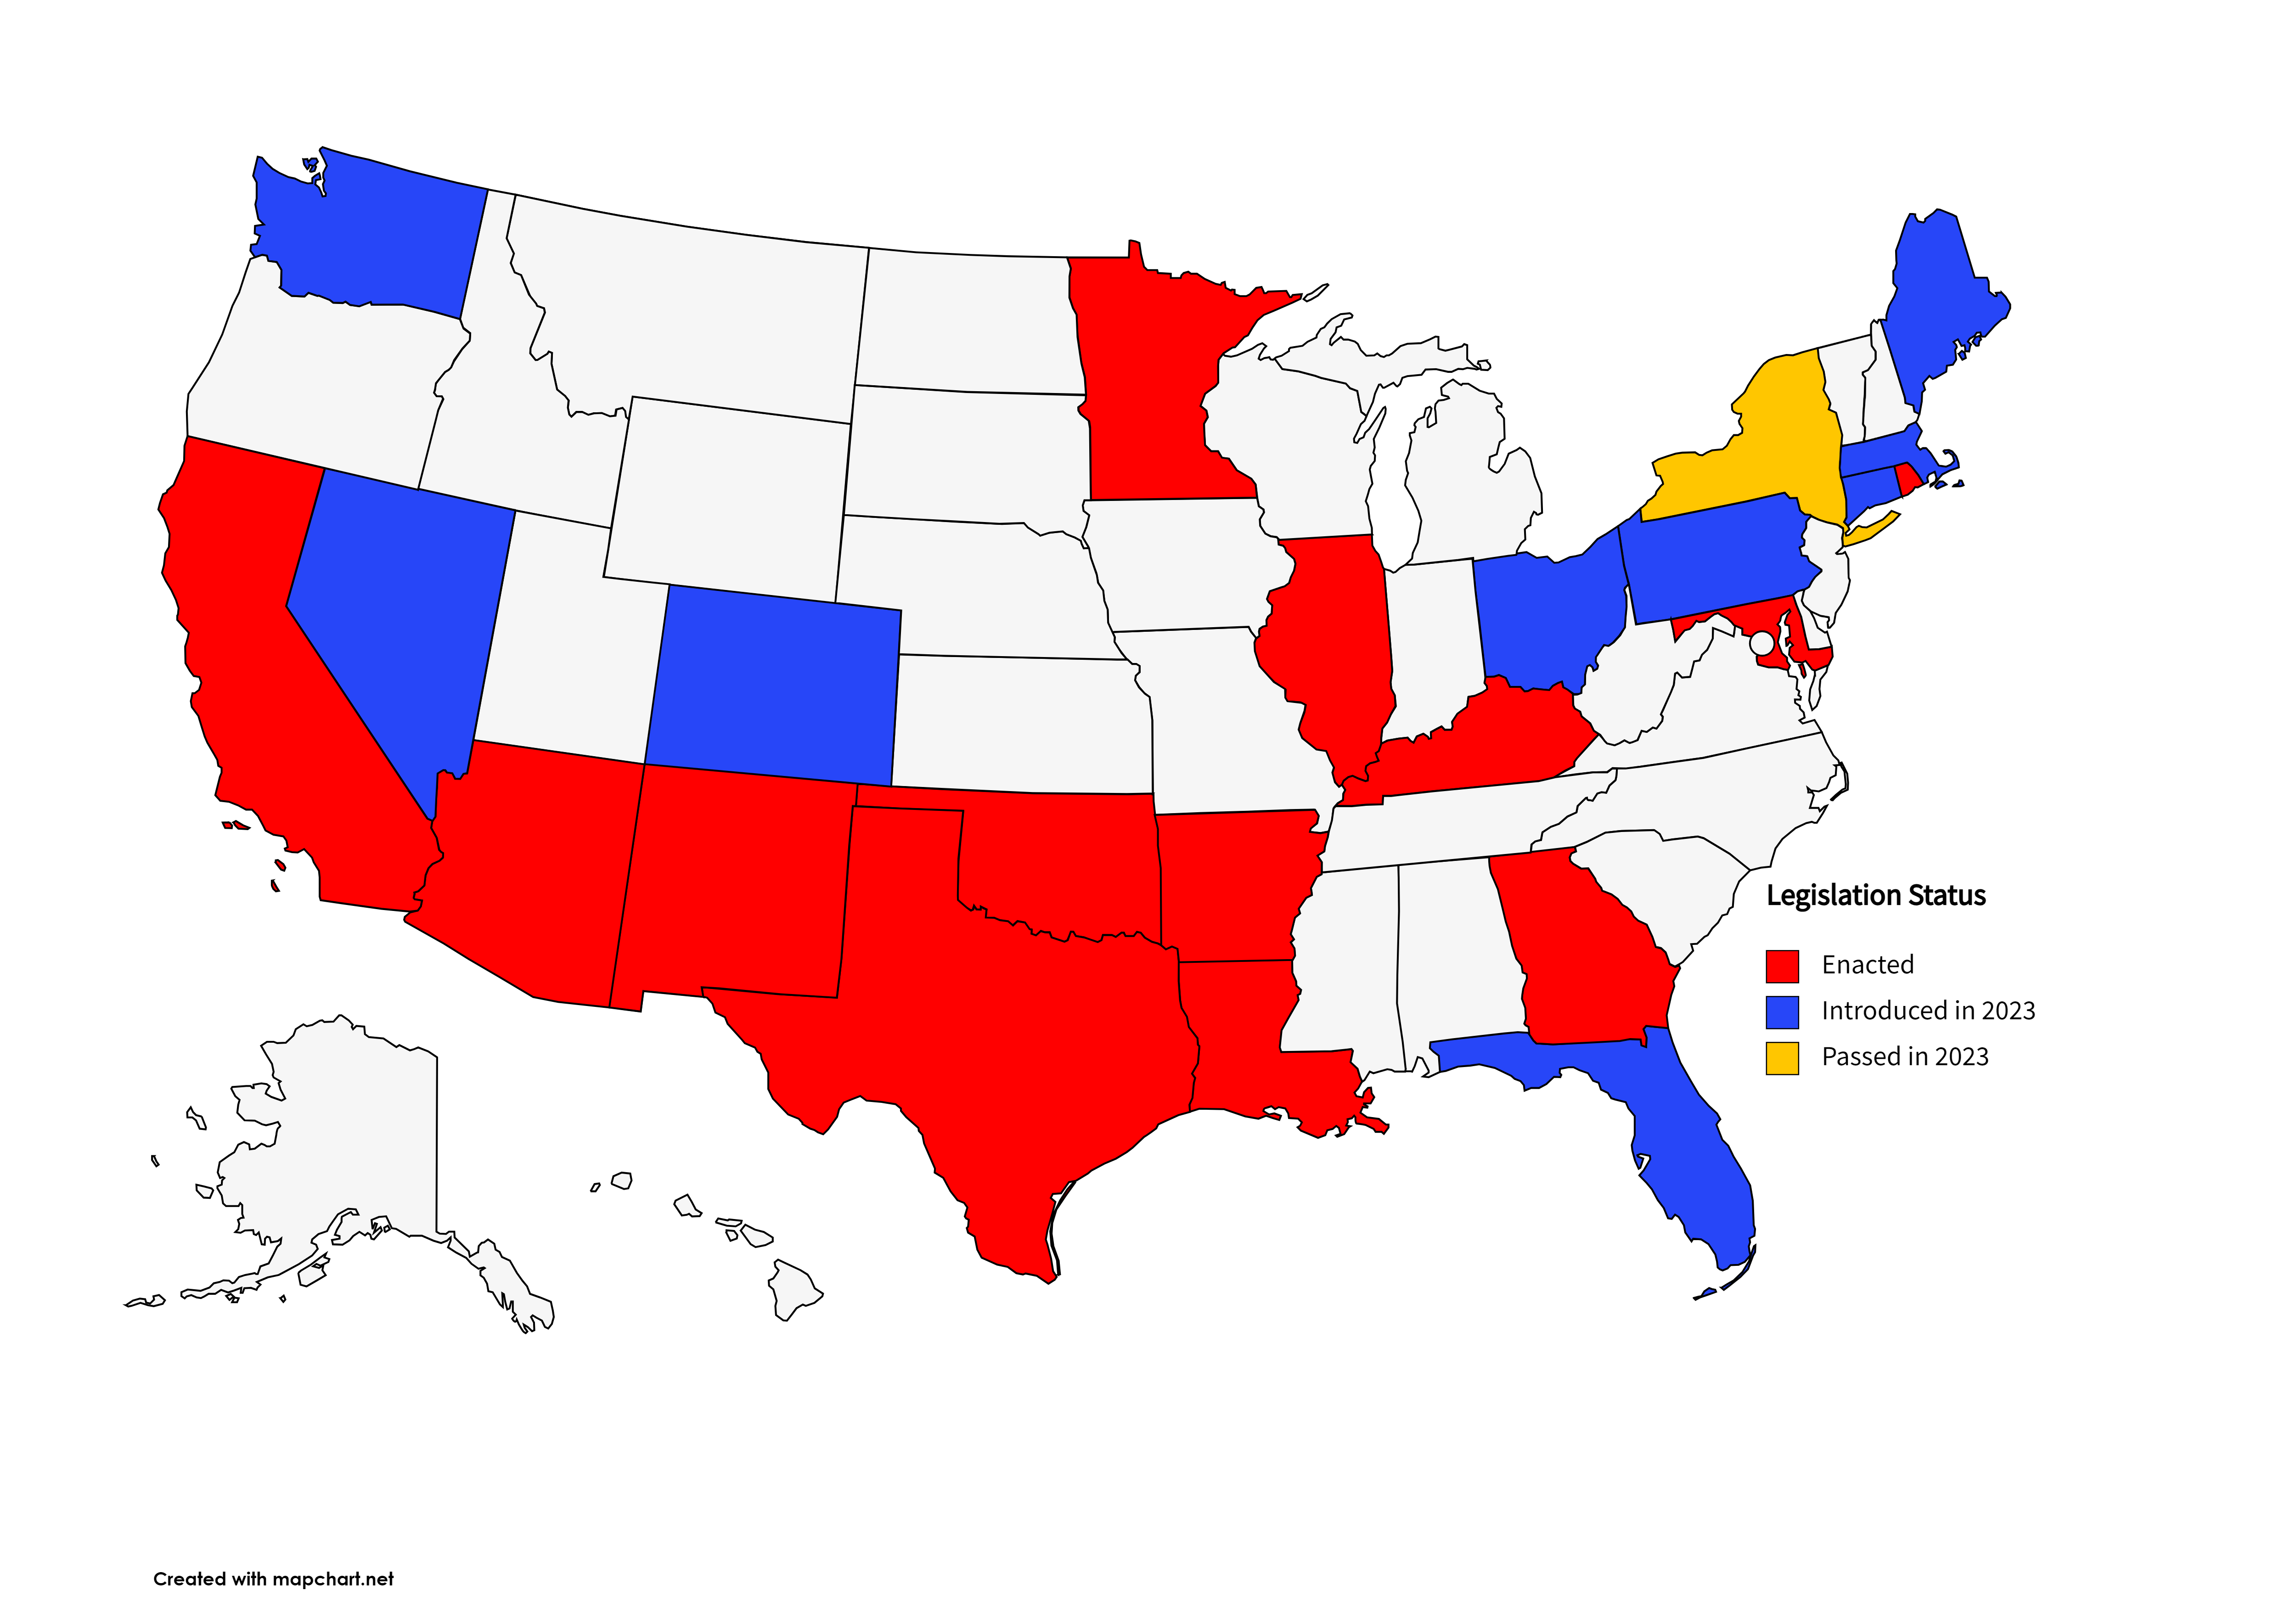 legislation_to_expand_access_to_biomarker_testing_map